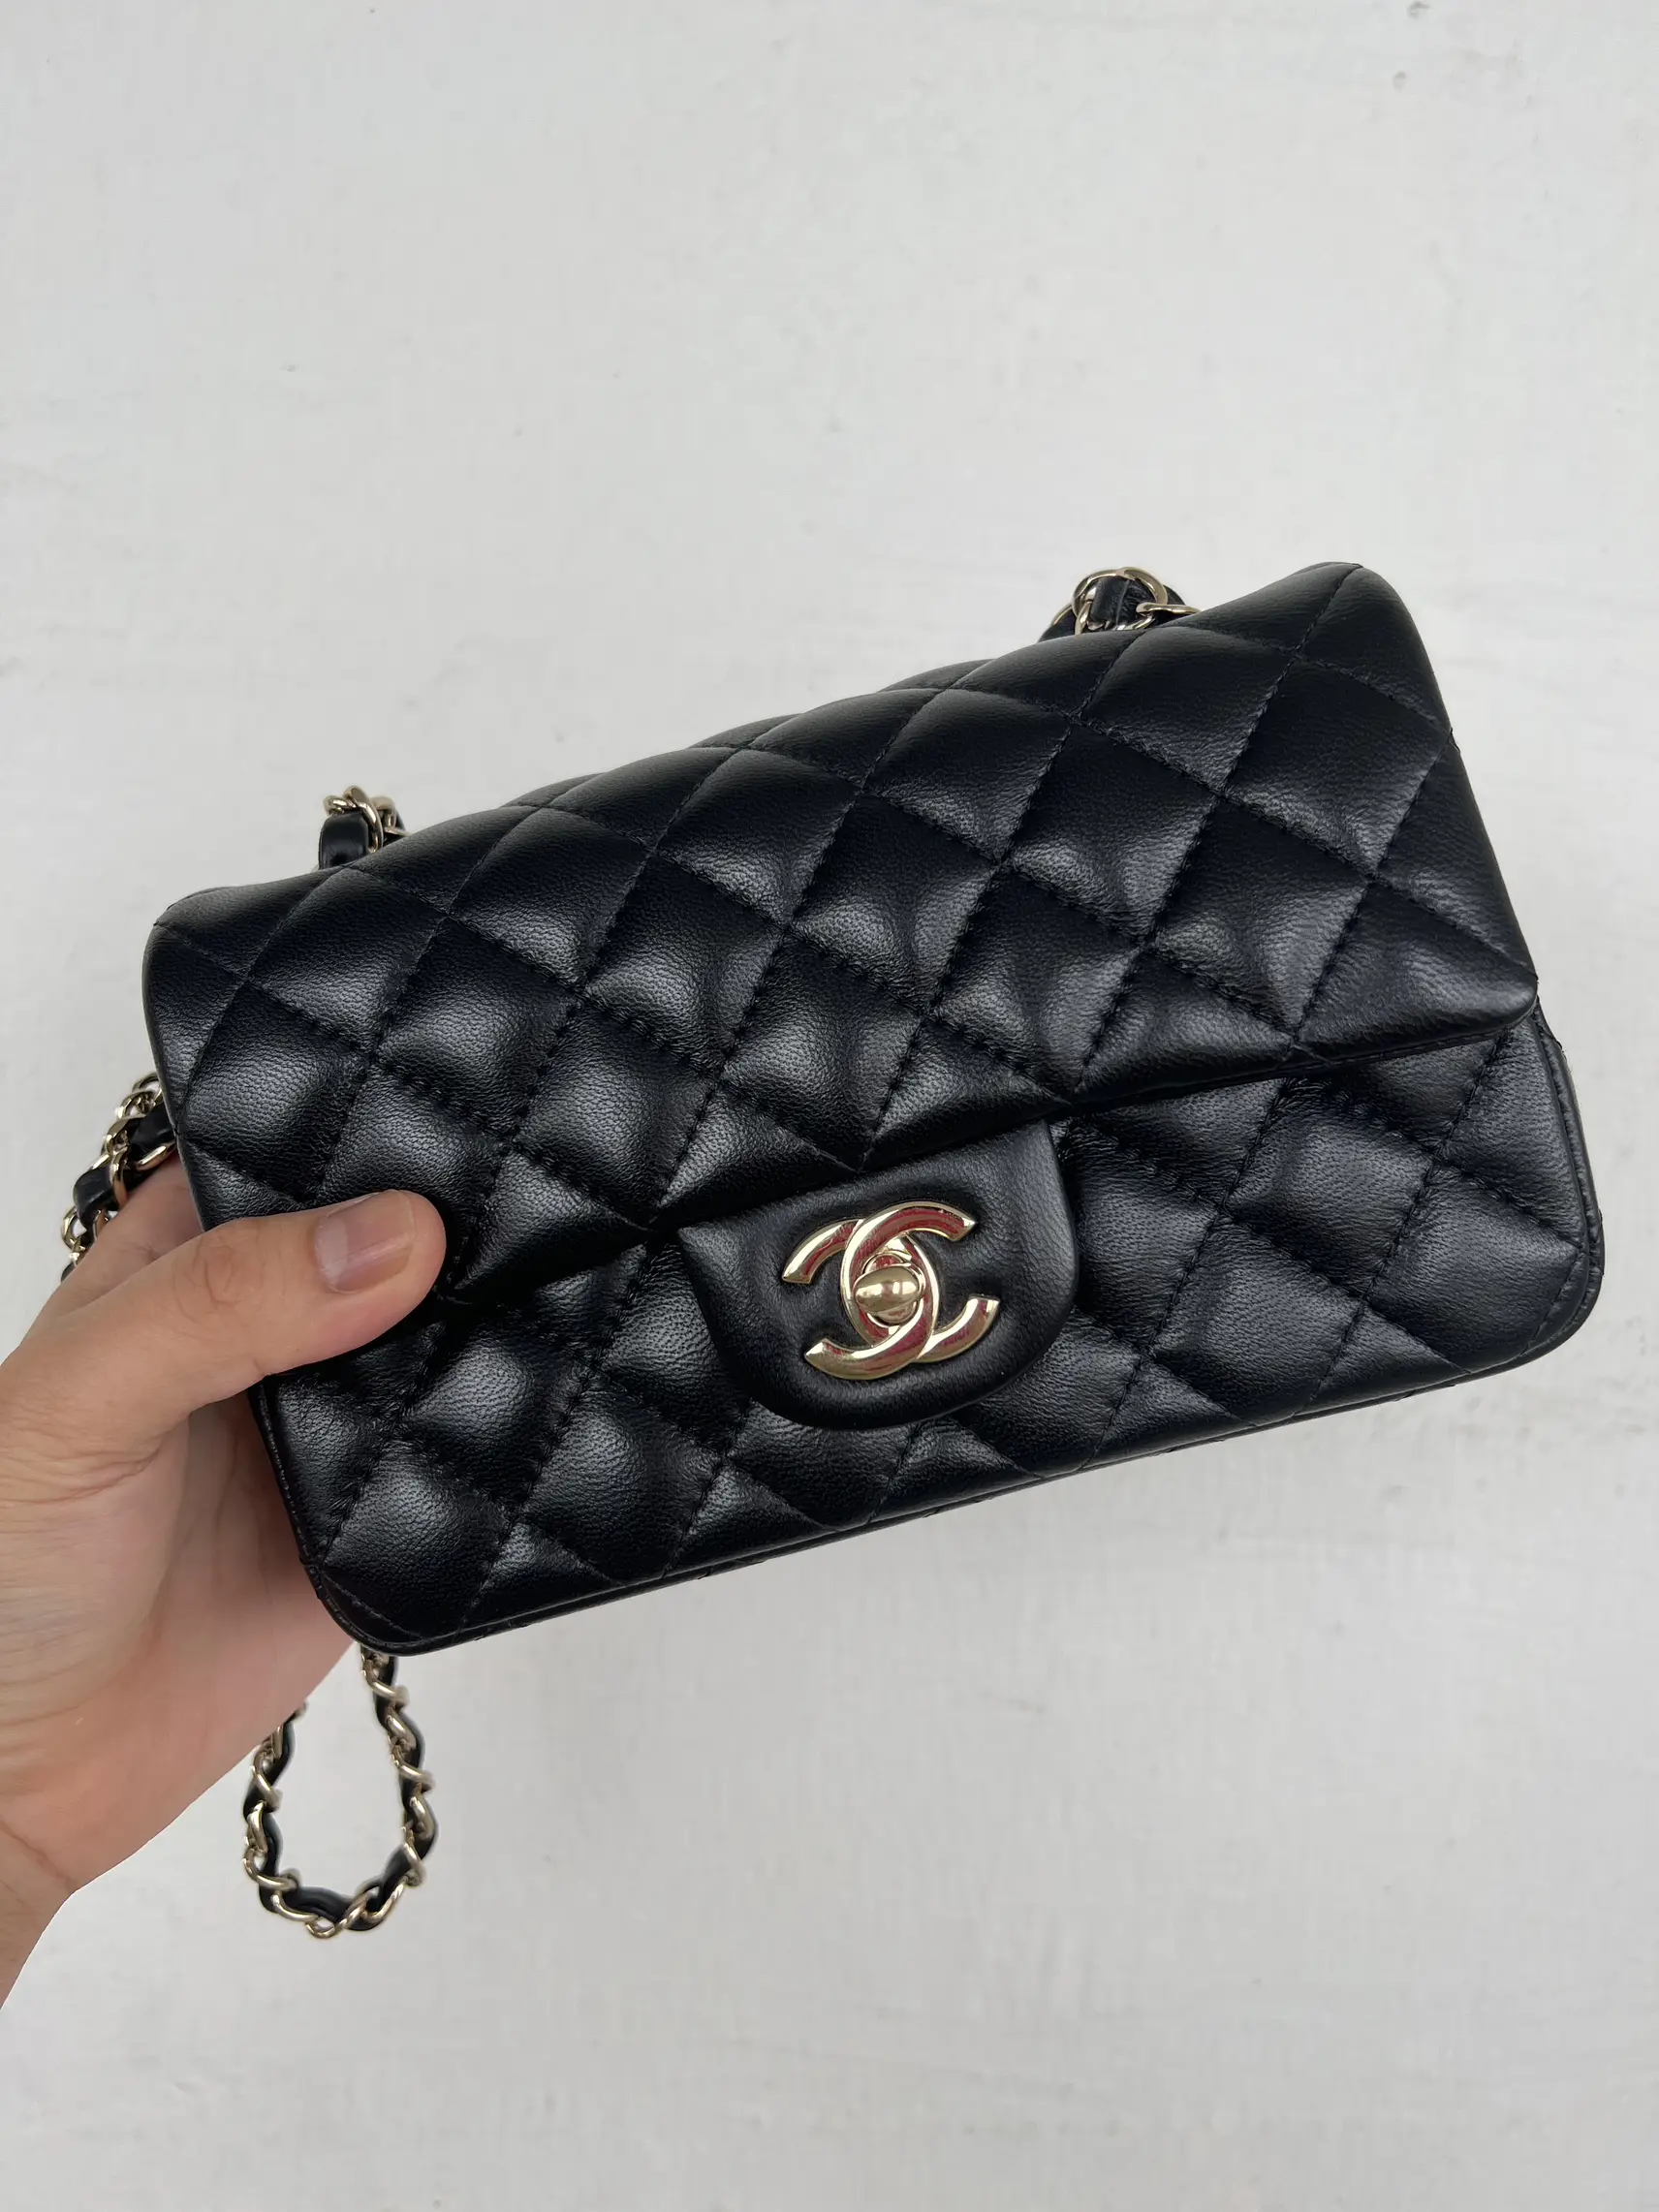 Chanel Timeless Classic Mini Rectangle, Gallery posted by Donn•G